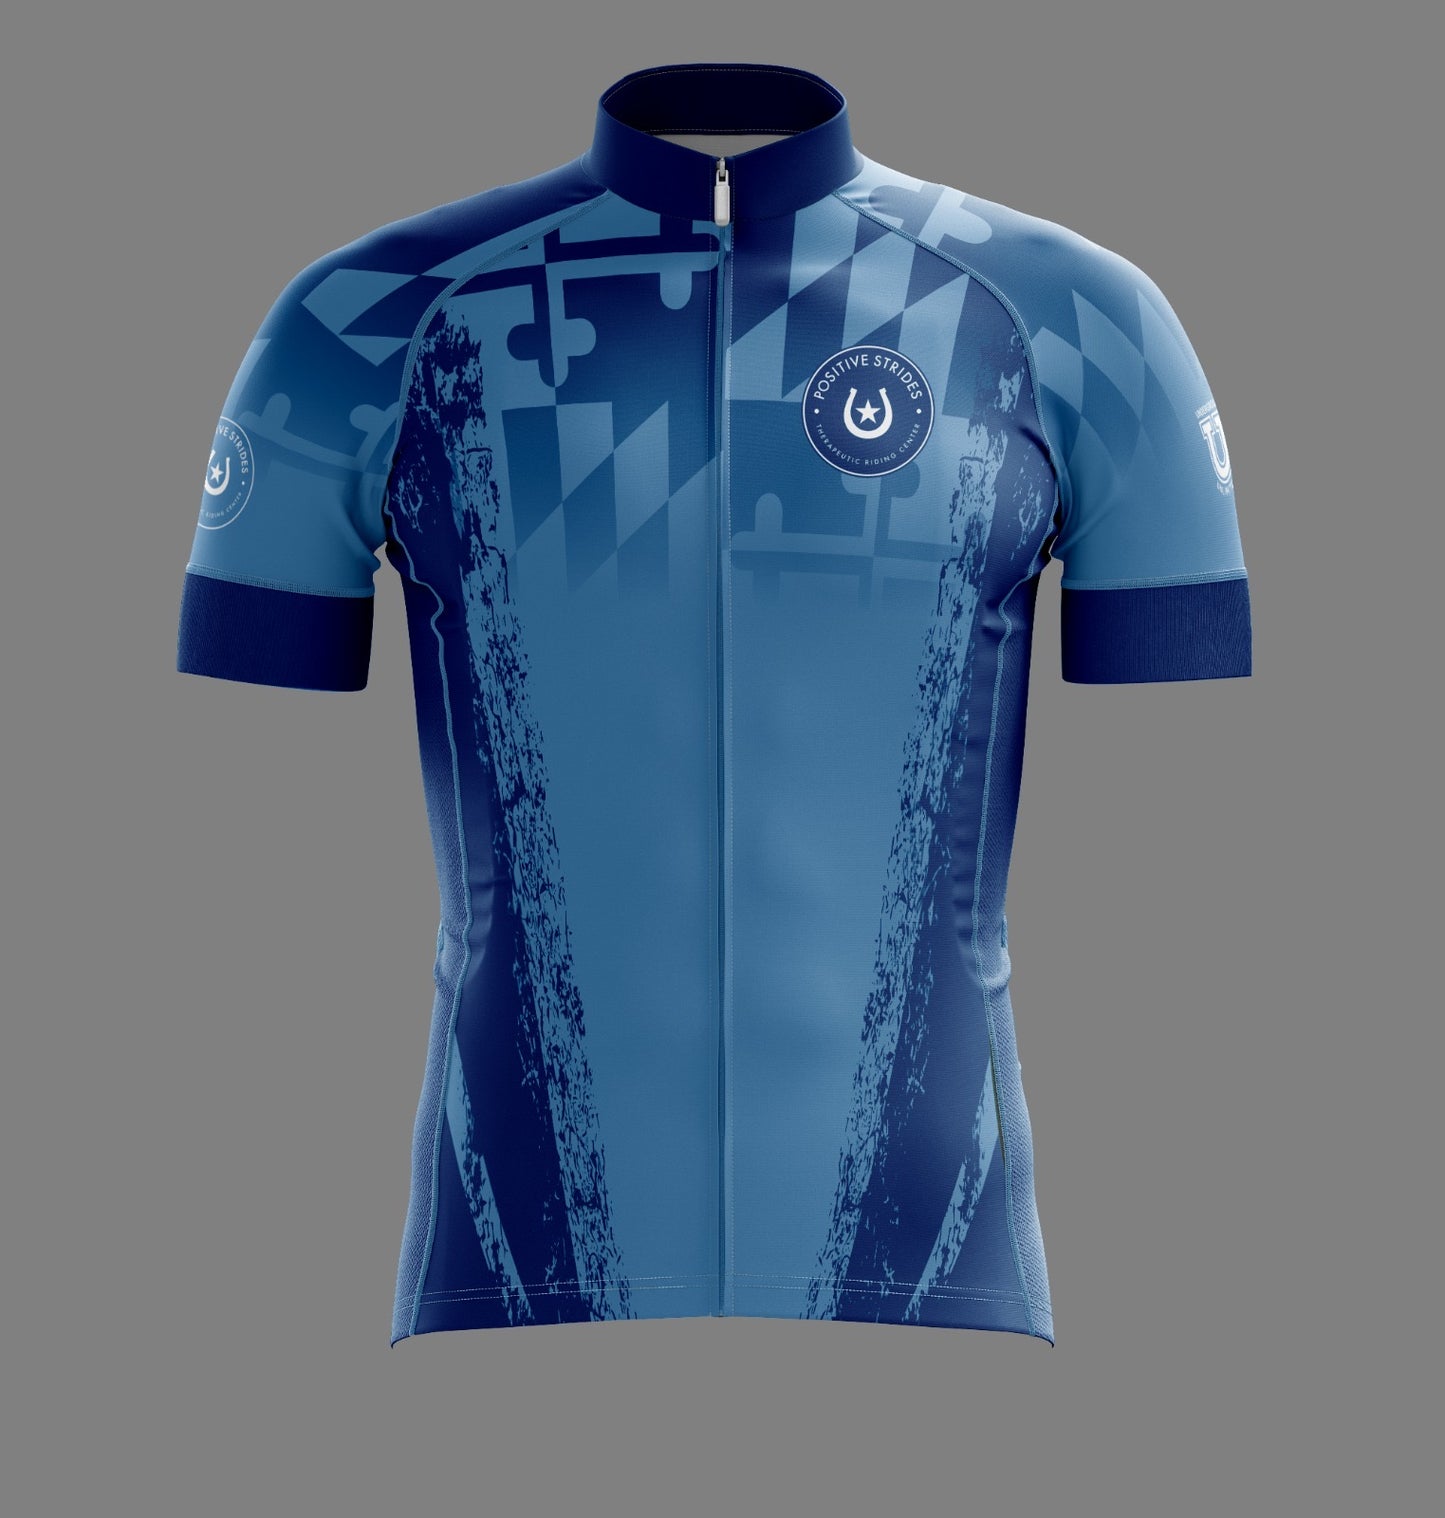 Positive Strides "Spring Classic" Performance Cycling Jersey ~ Columbia Maryland Fade